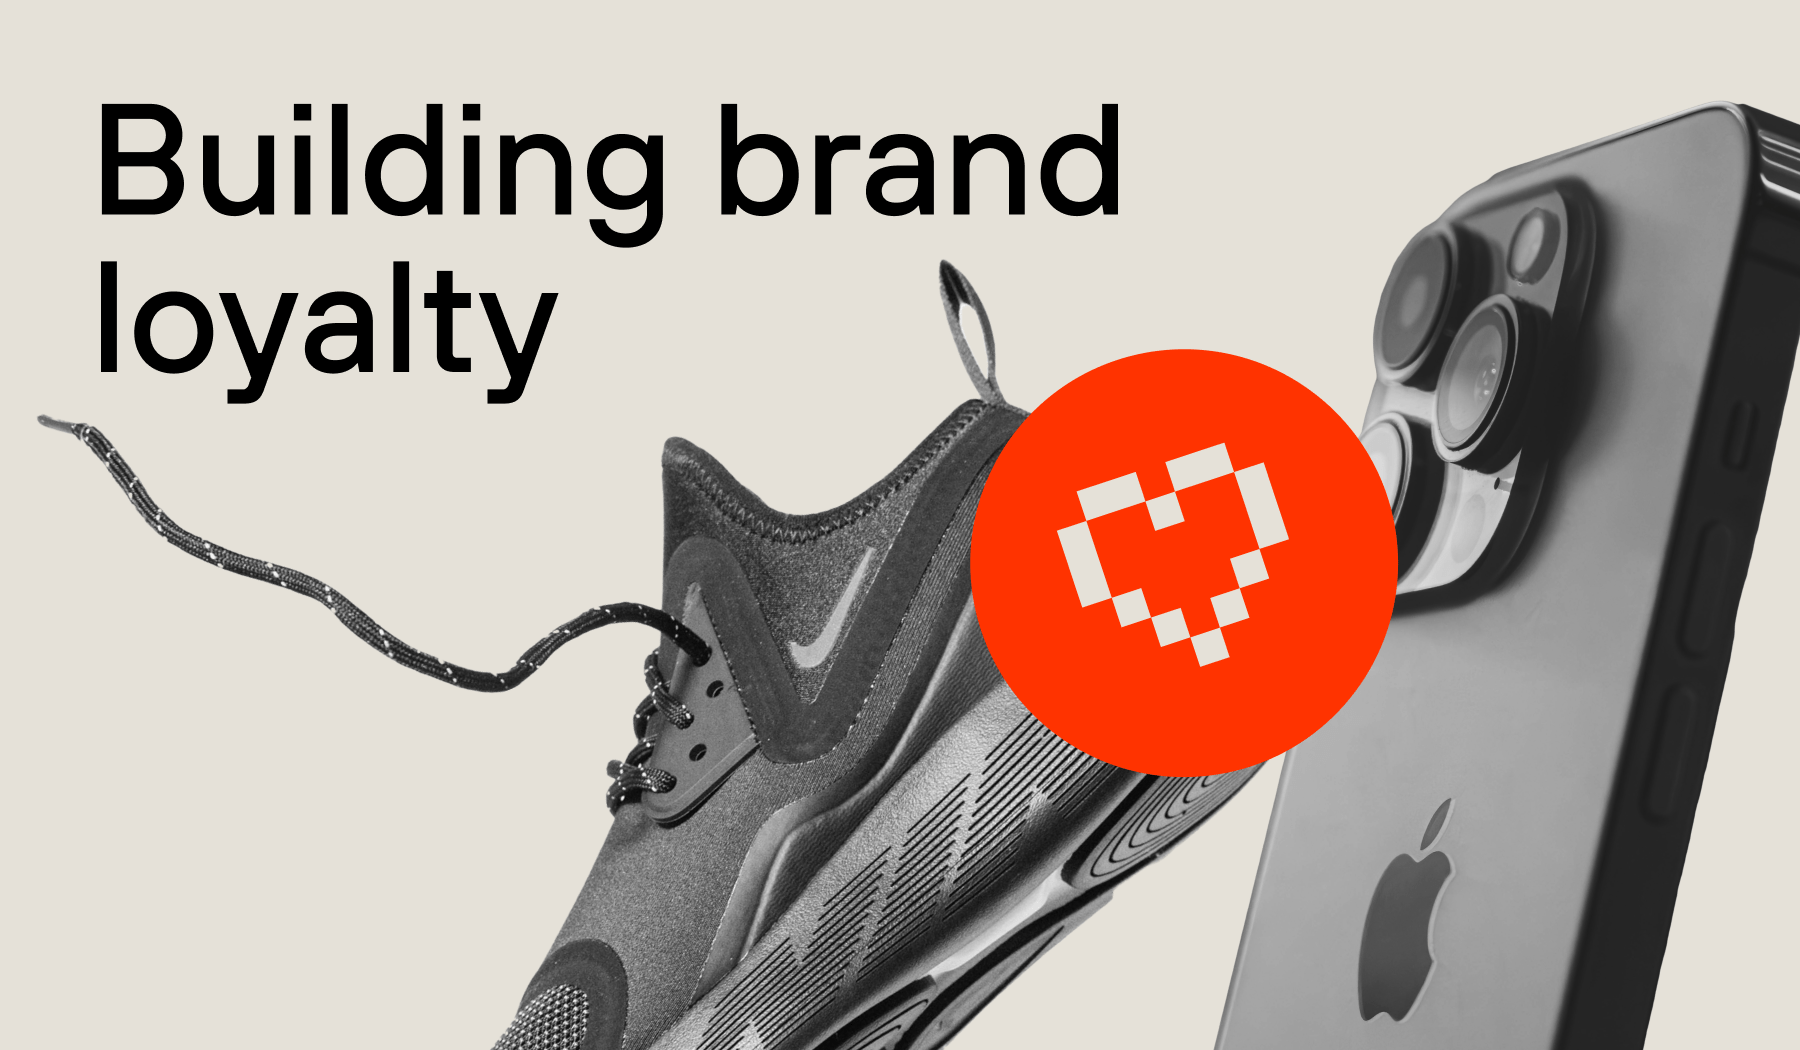 Graphic featuring a NIke shoe and an Apple iPhone a part of an article about strategies for building brand loyalty.